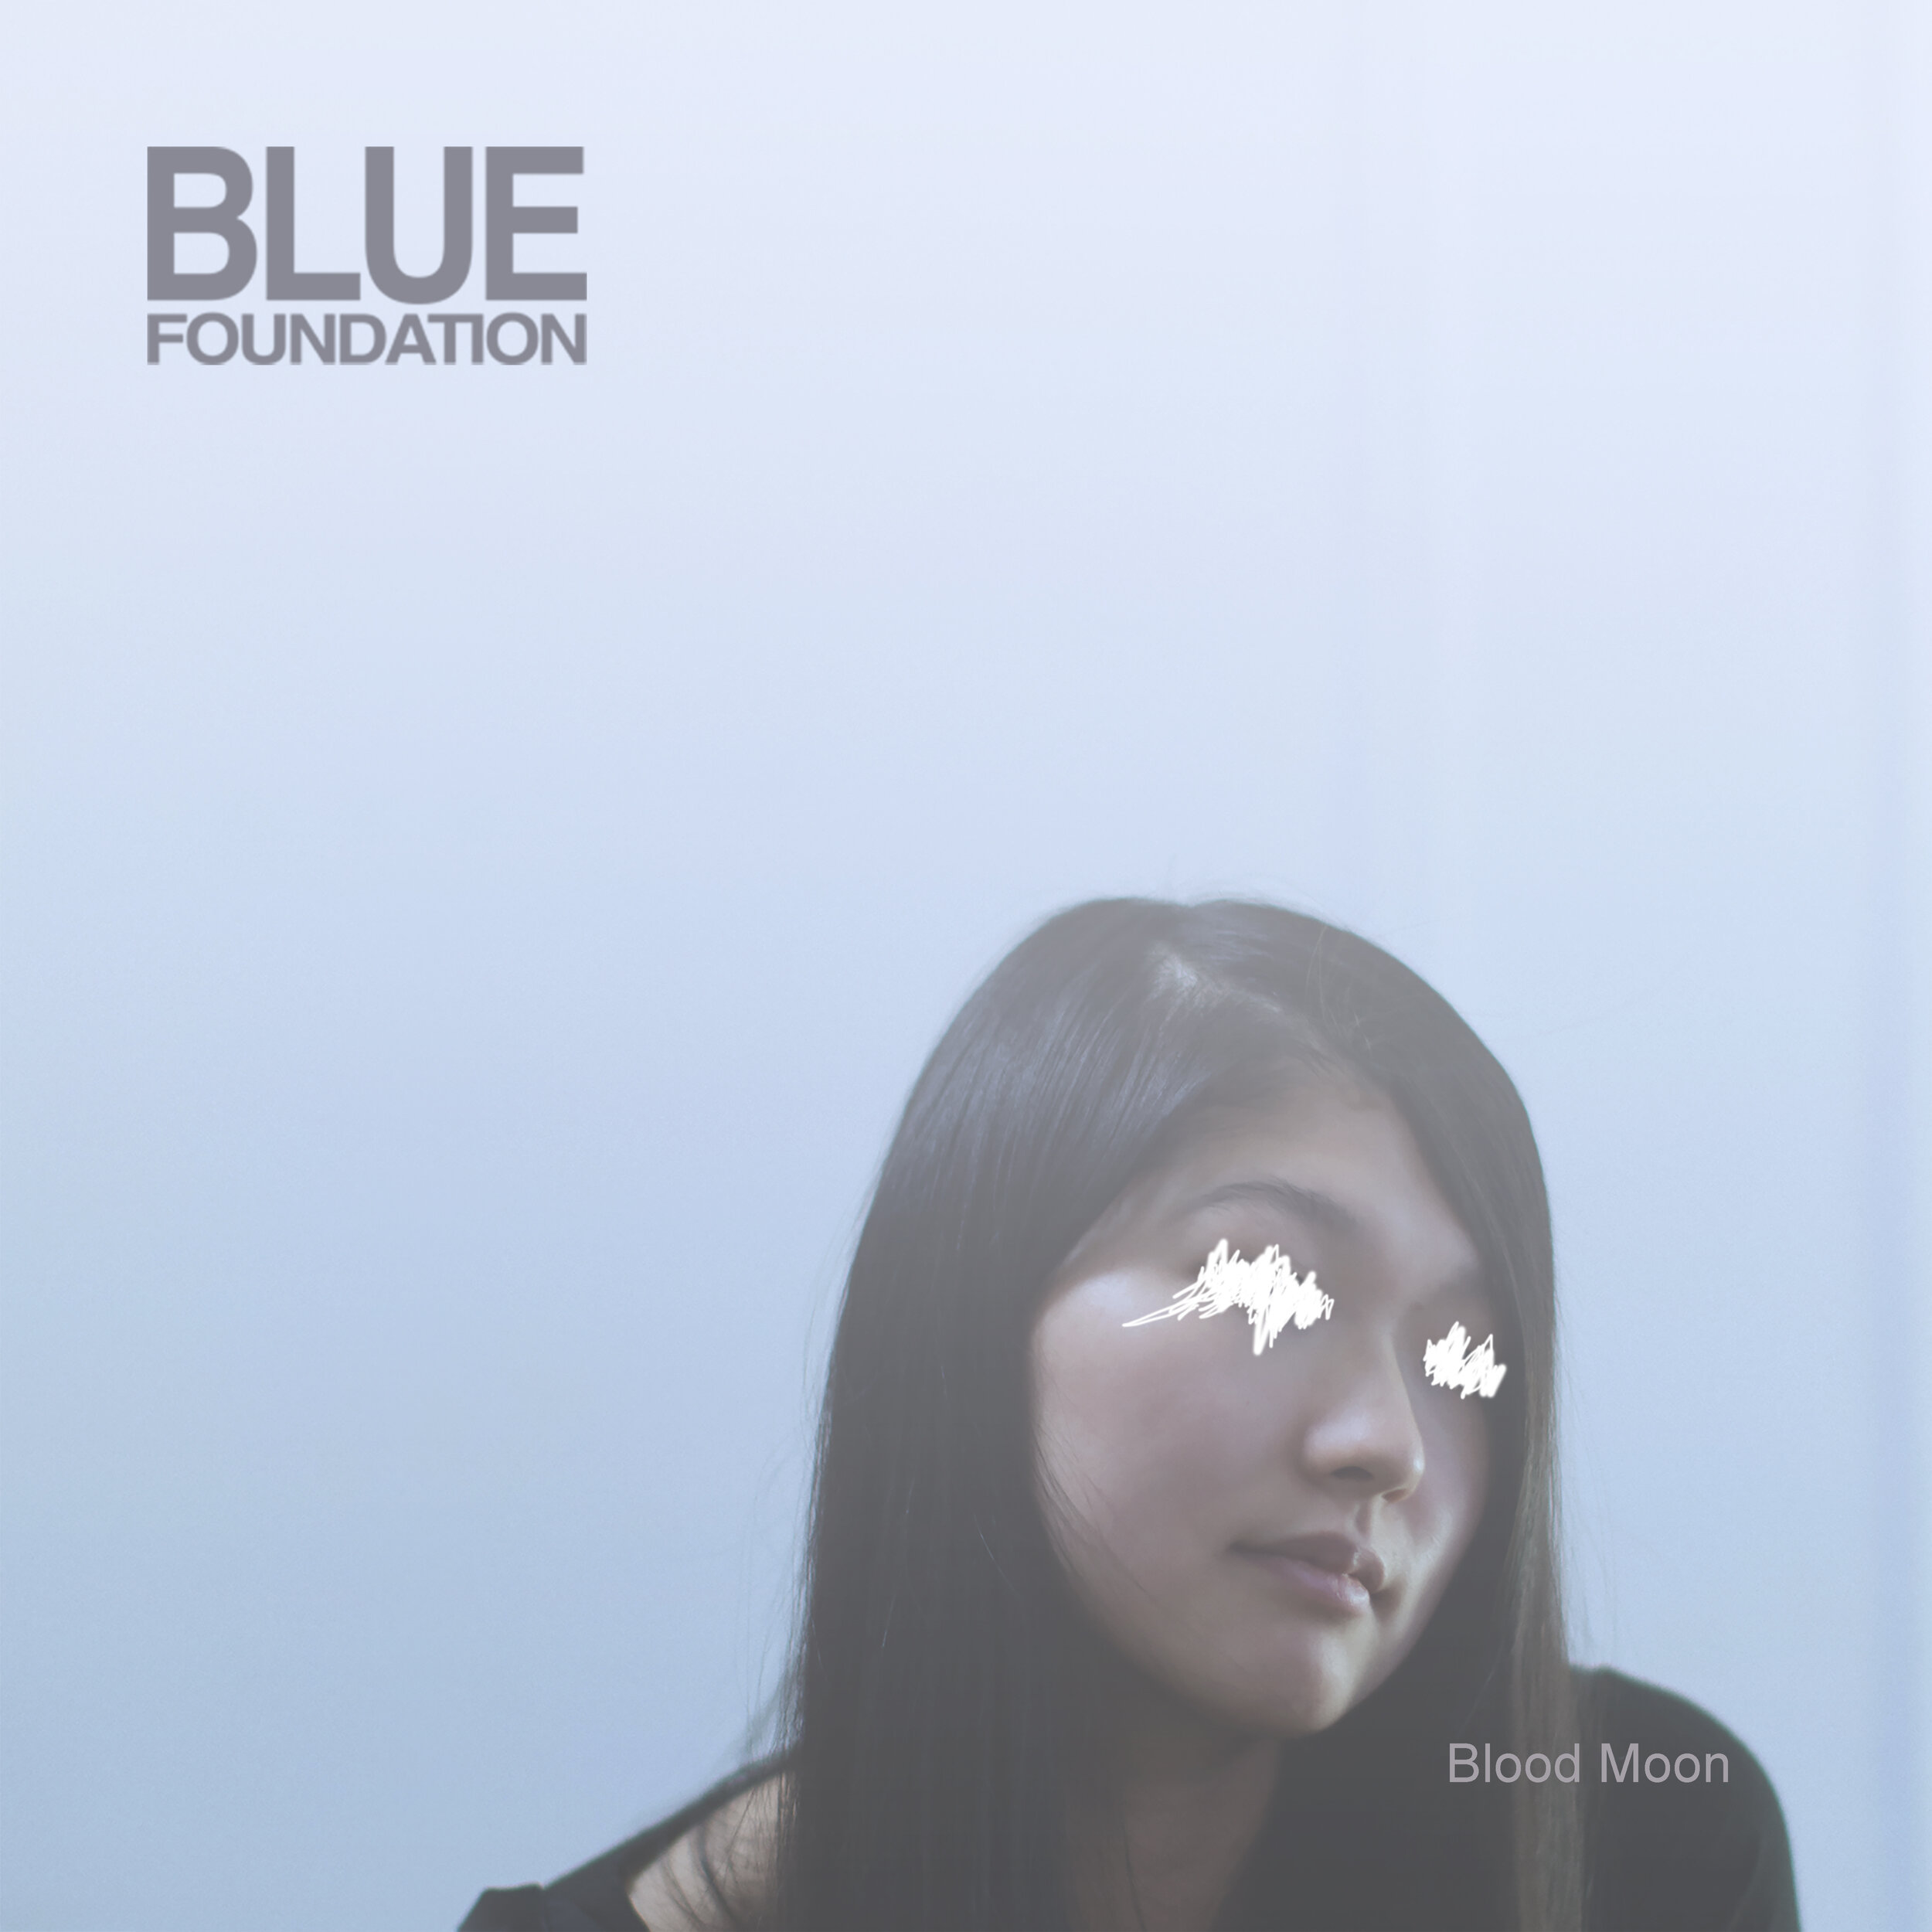 Blue Foundation: albums, songs, playlists